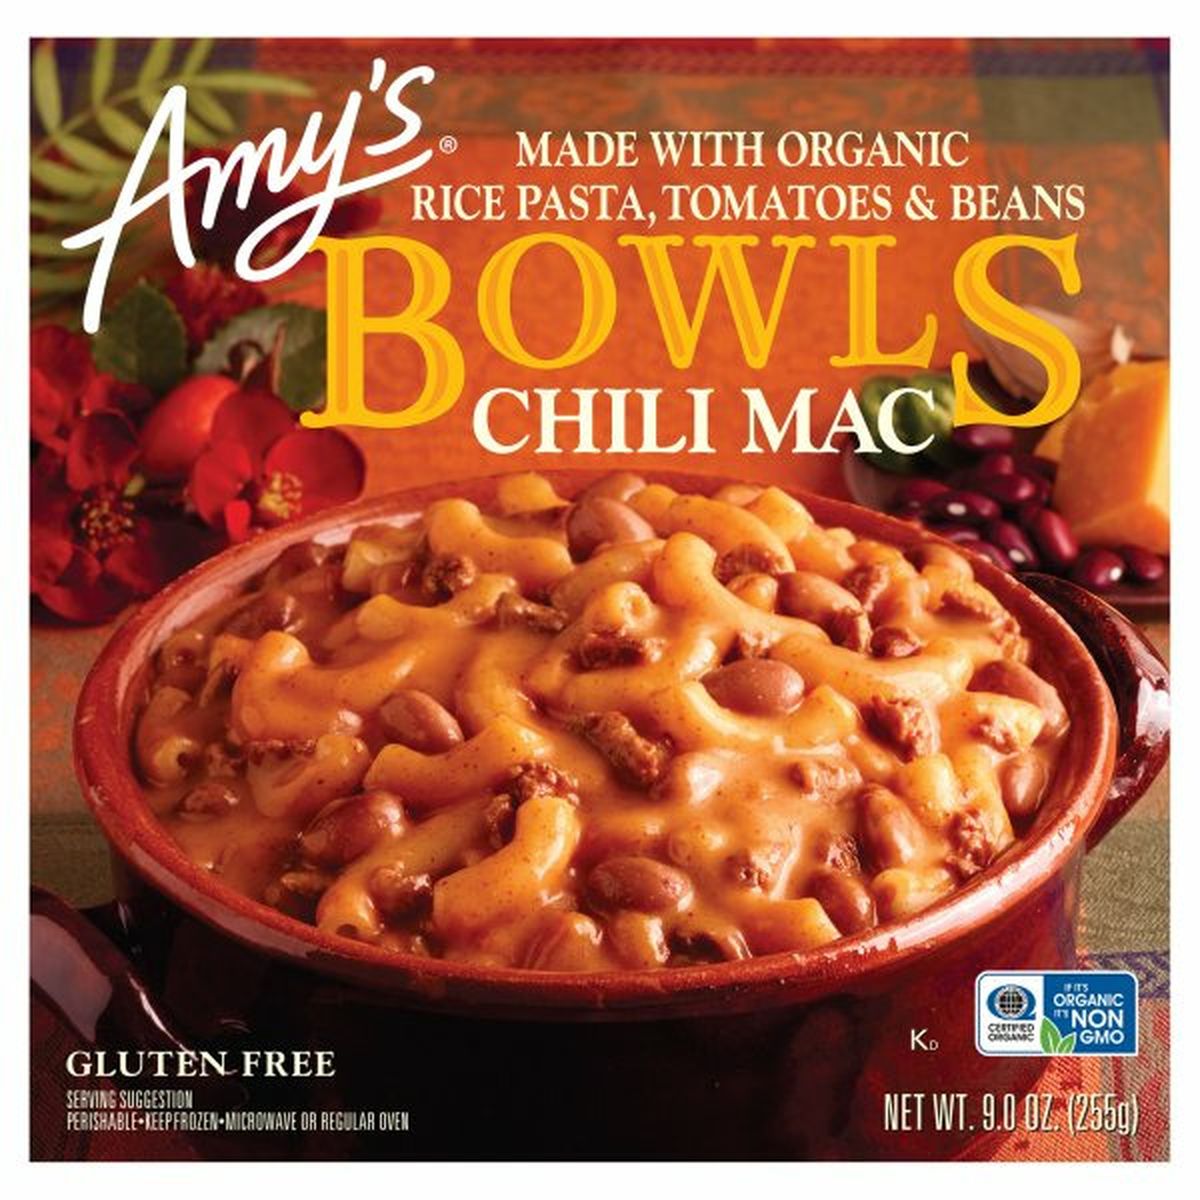 Calories in Amy's Kitchen Bowls Chili Mac